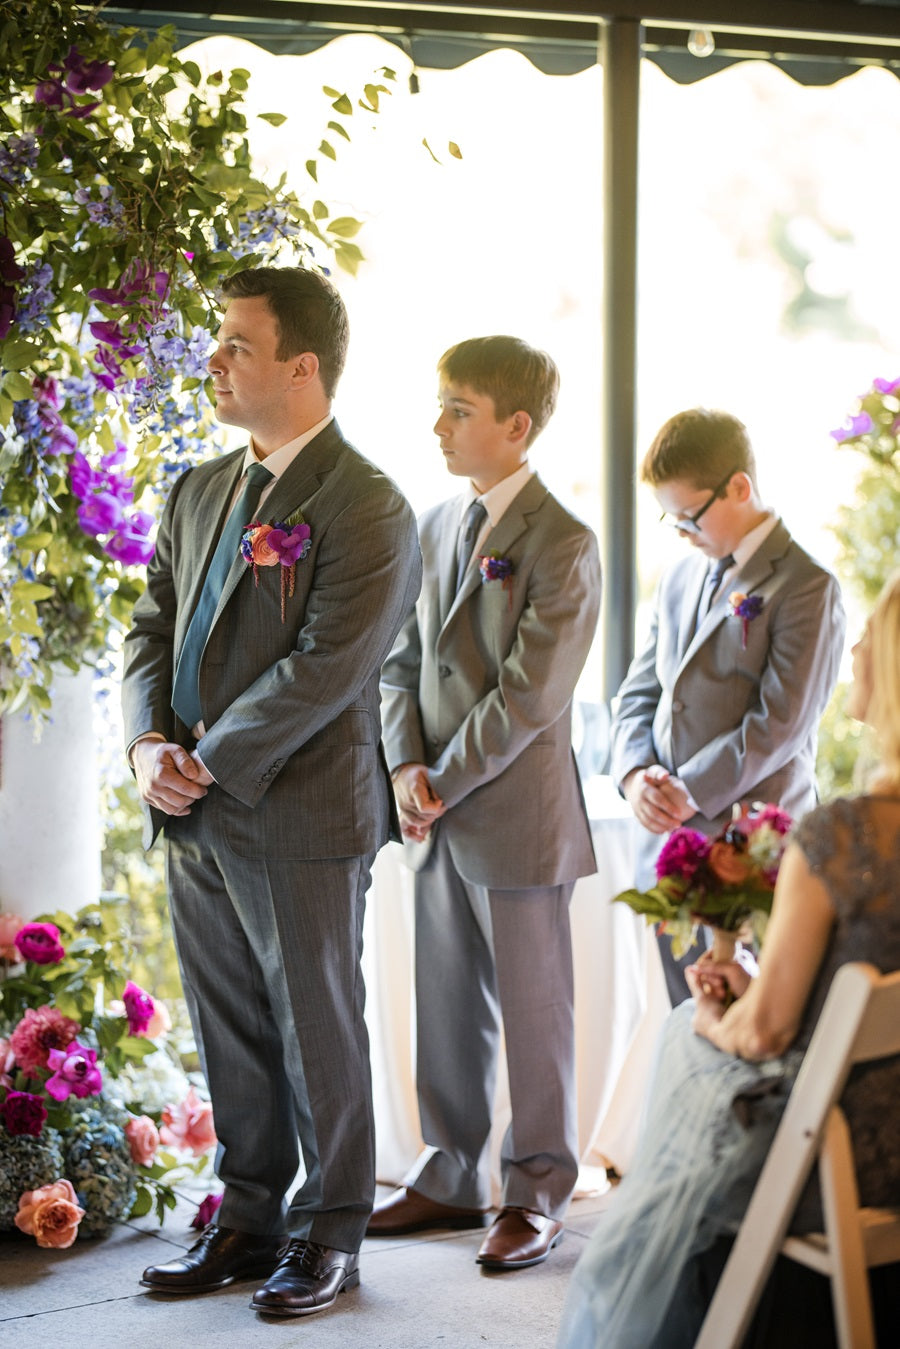 Groomsmen stand to the right of the groom, hands fold in front. They all wear matching pocket squares of pink, pink, purple, and blue, with green accents.